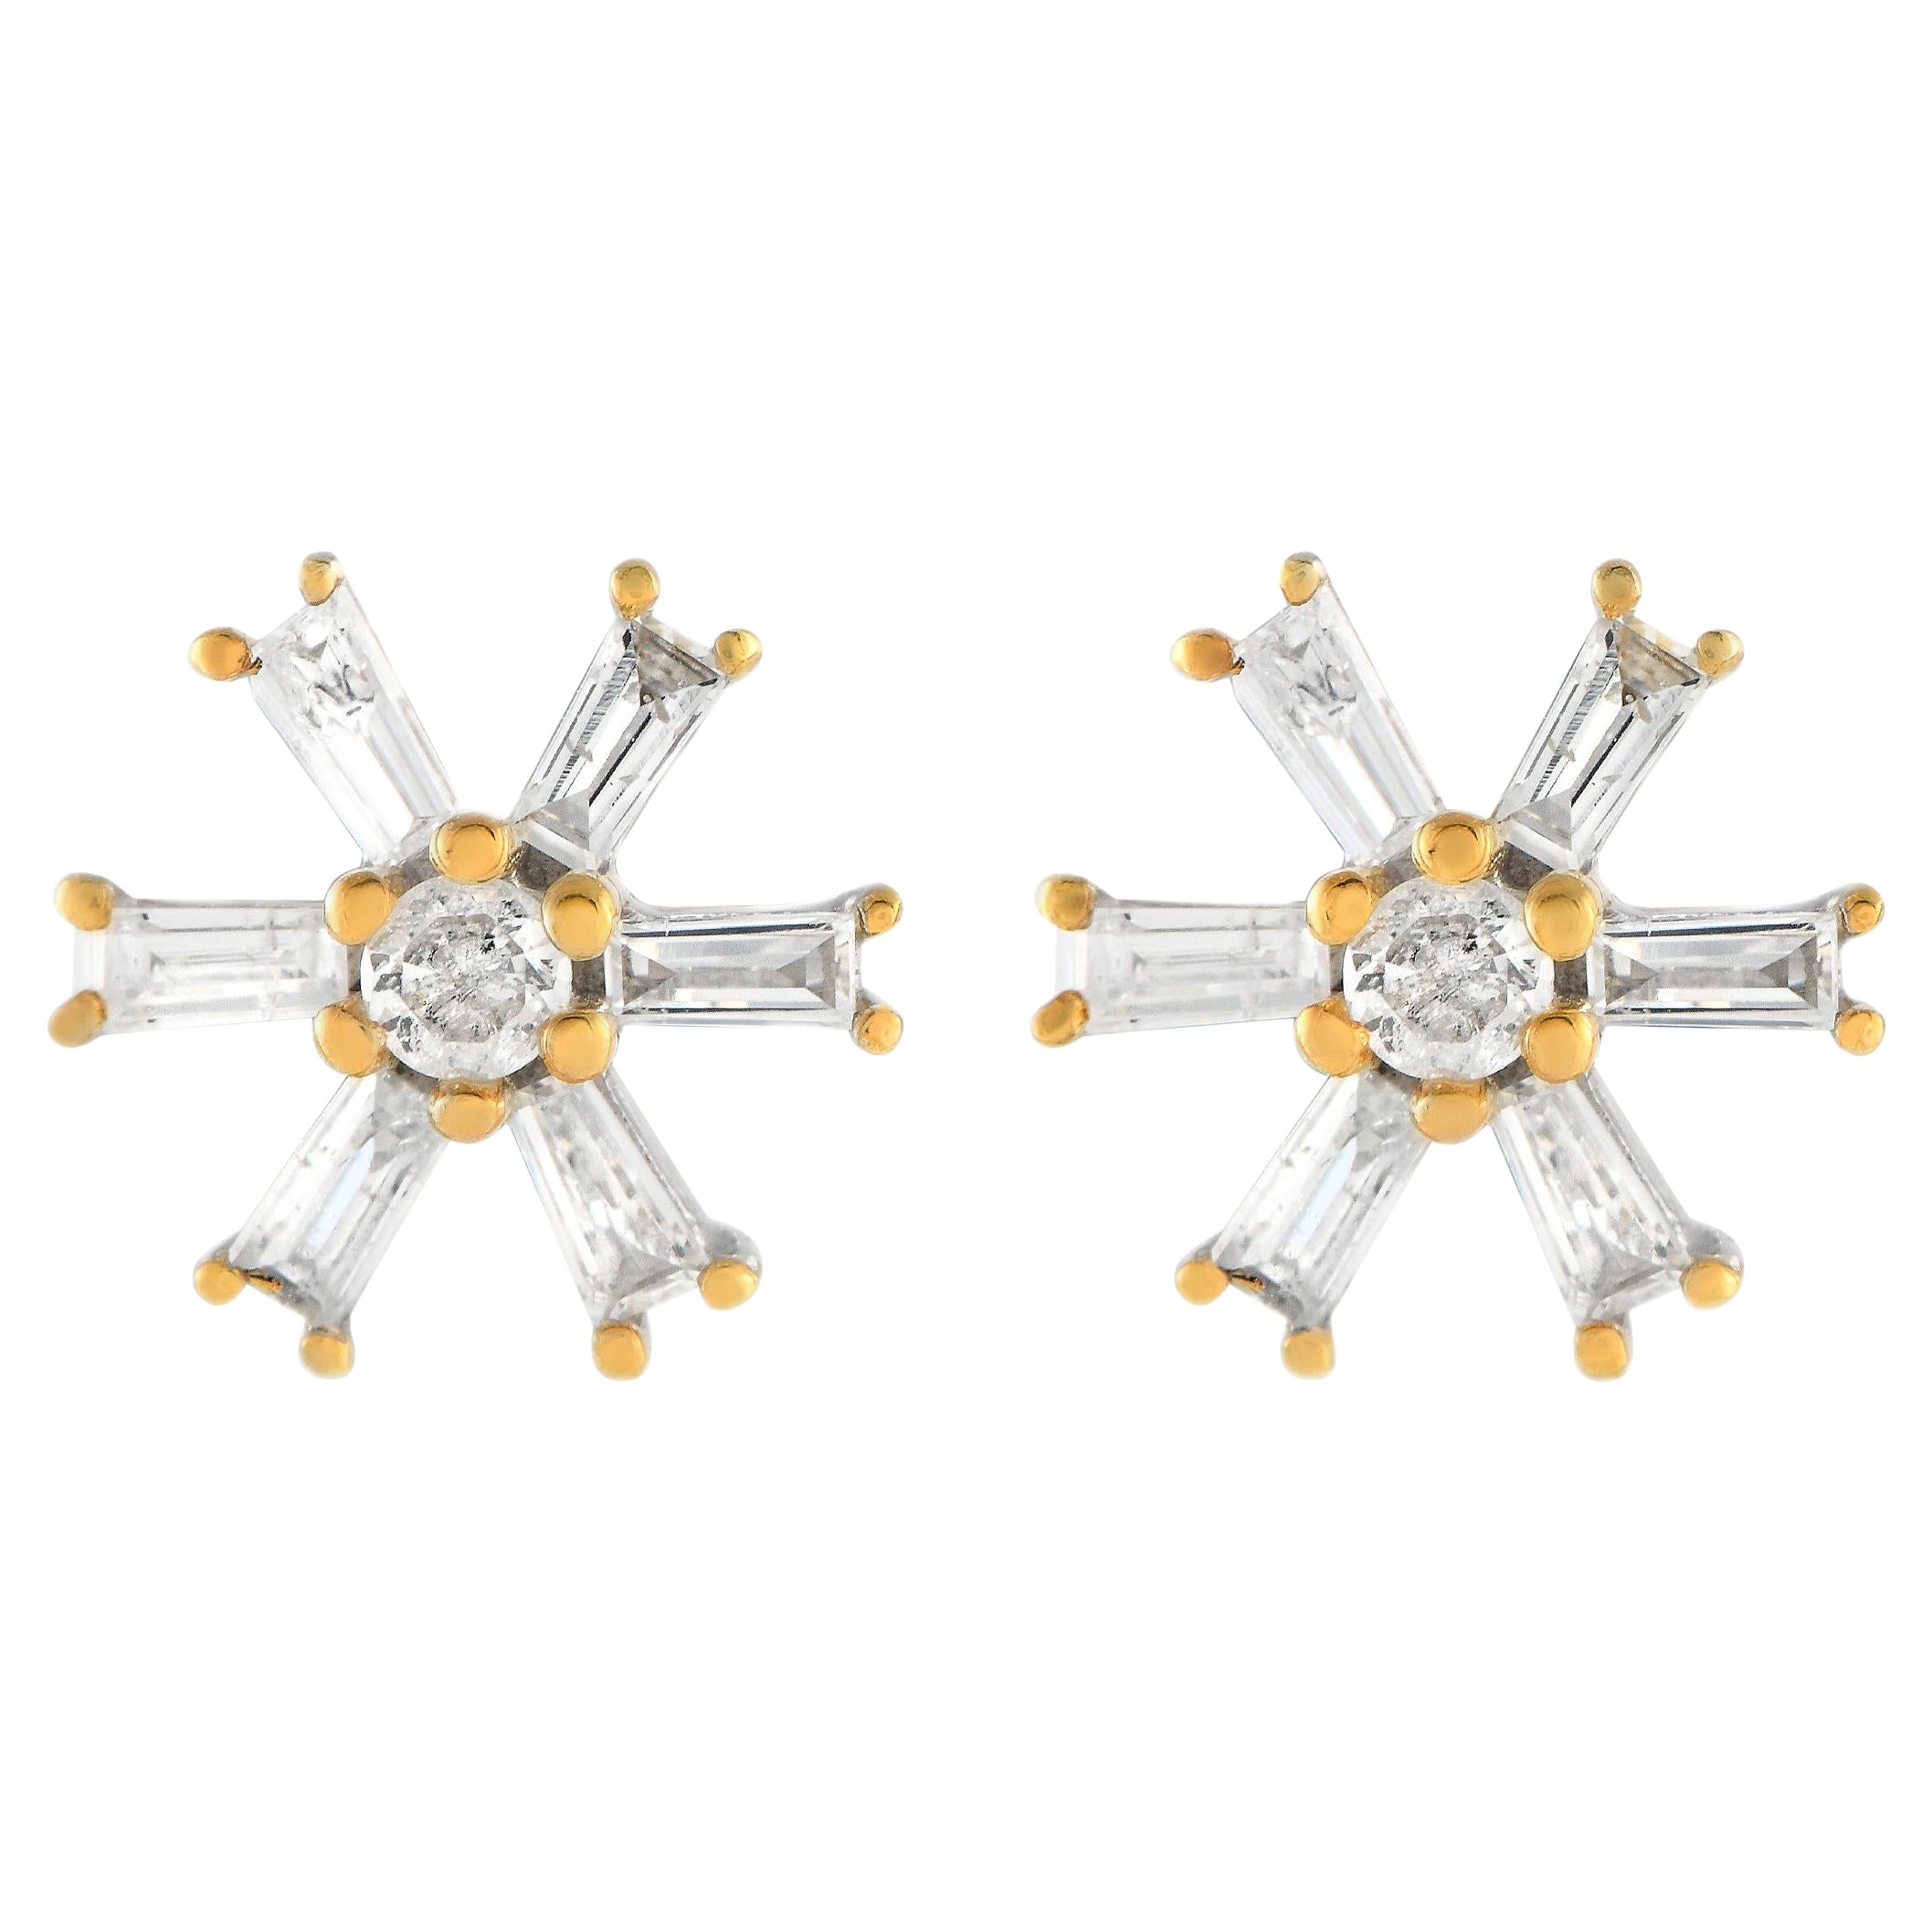 LB Exclusive 14K White and Yellow Gold 0.25ct Diamond Earrings For Sale